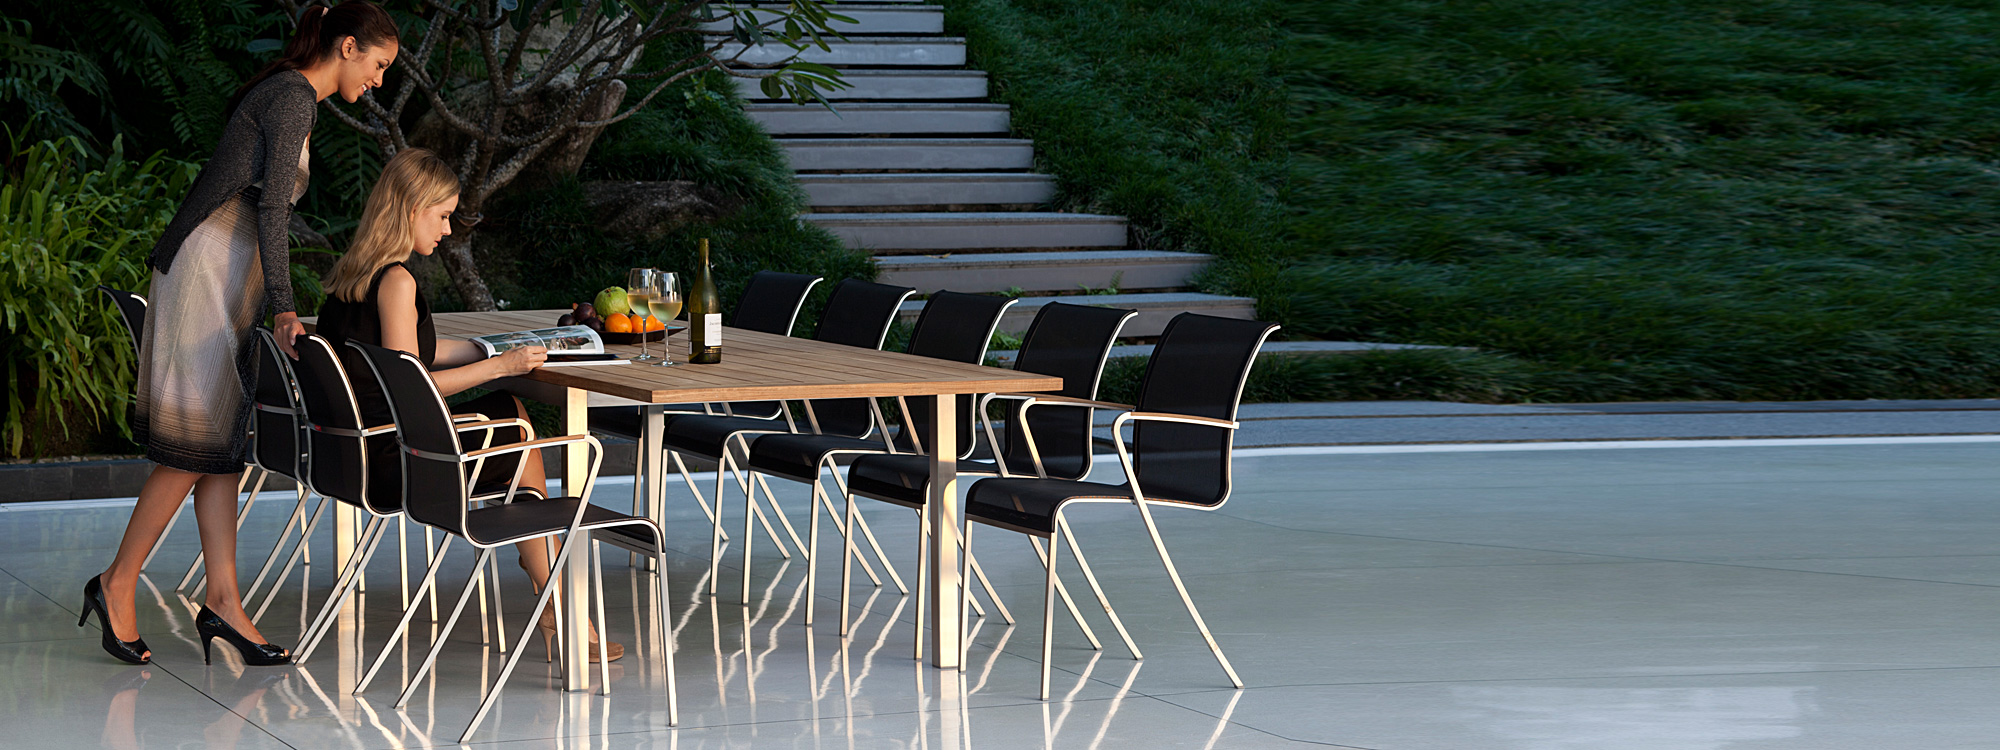 Image of QT55 chair and Taboela dining table by Royal Botania garden furniture